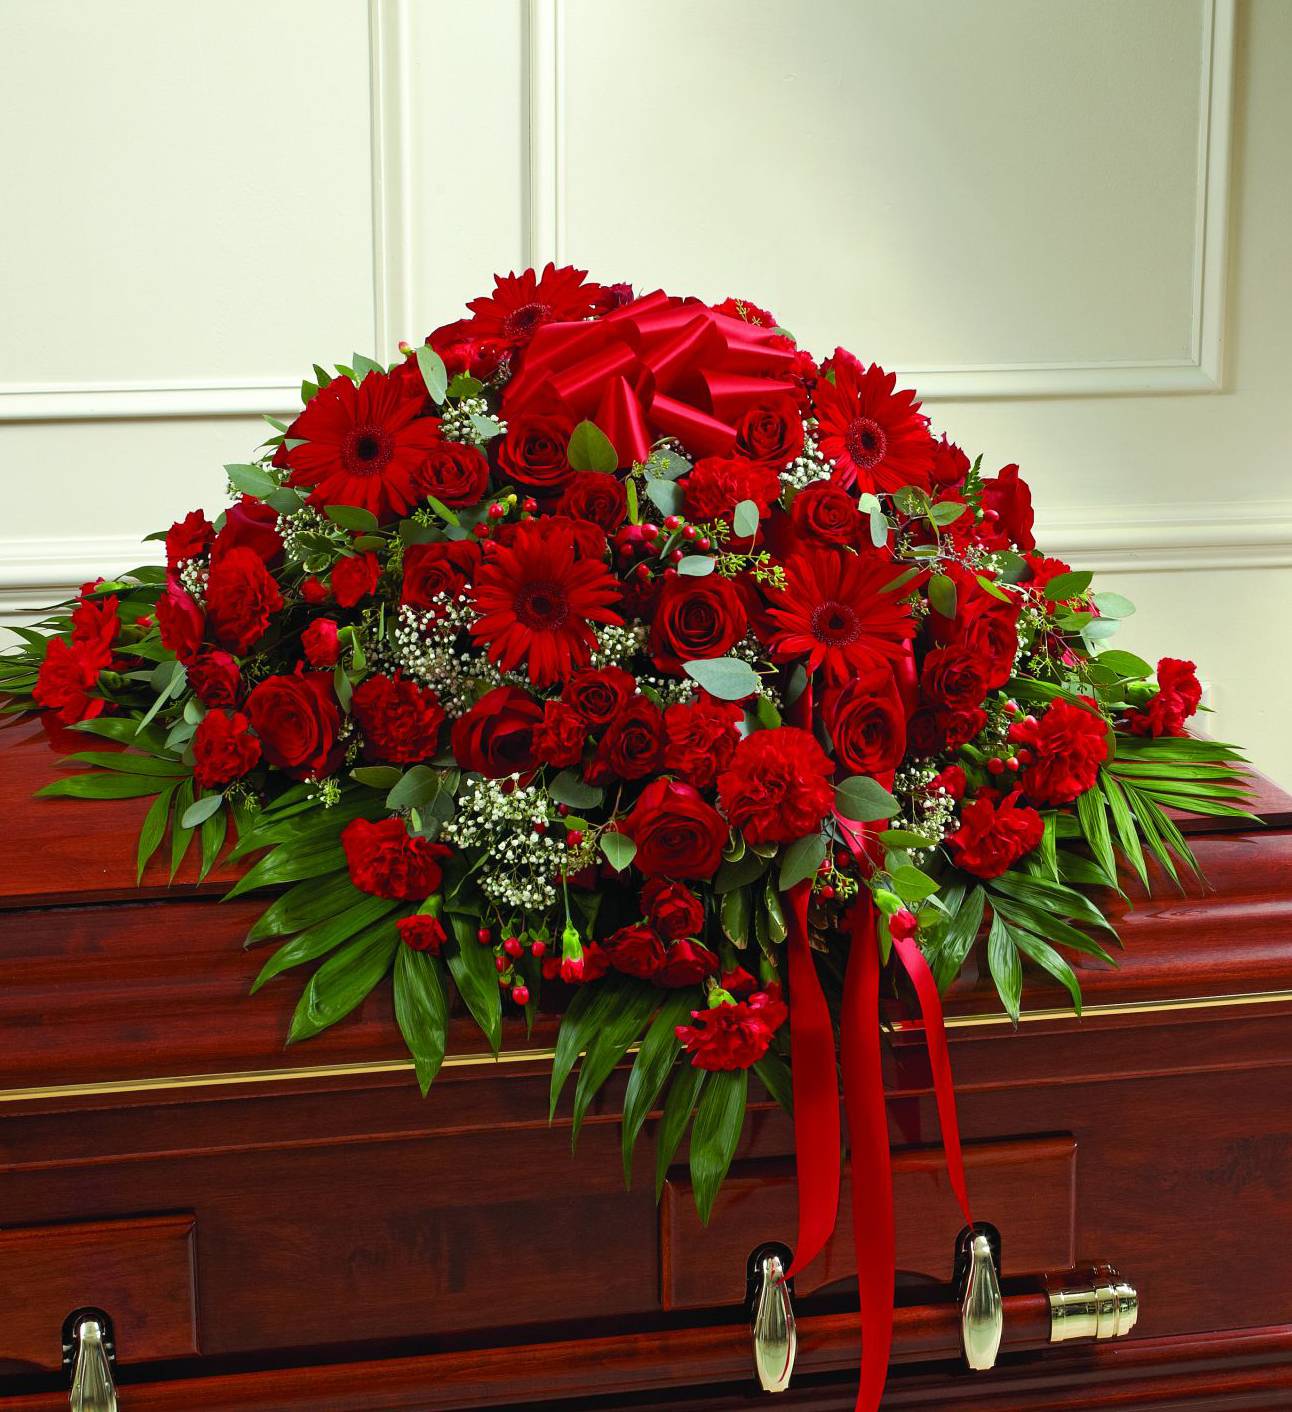 List 91+ Pictures Pictures Of Funeral Flowers Arrangements Stunning